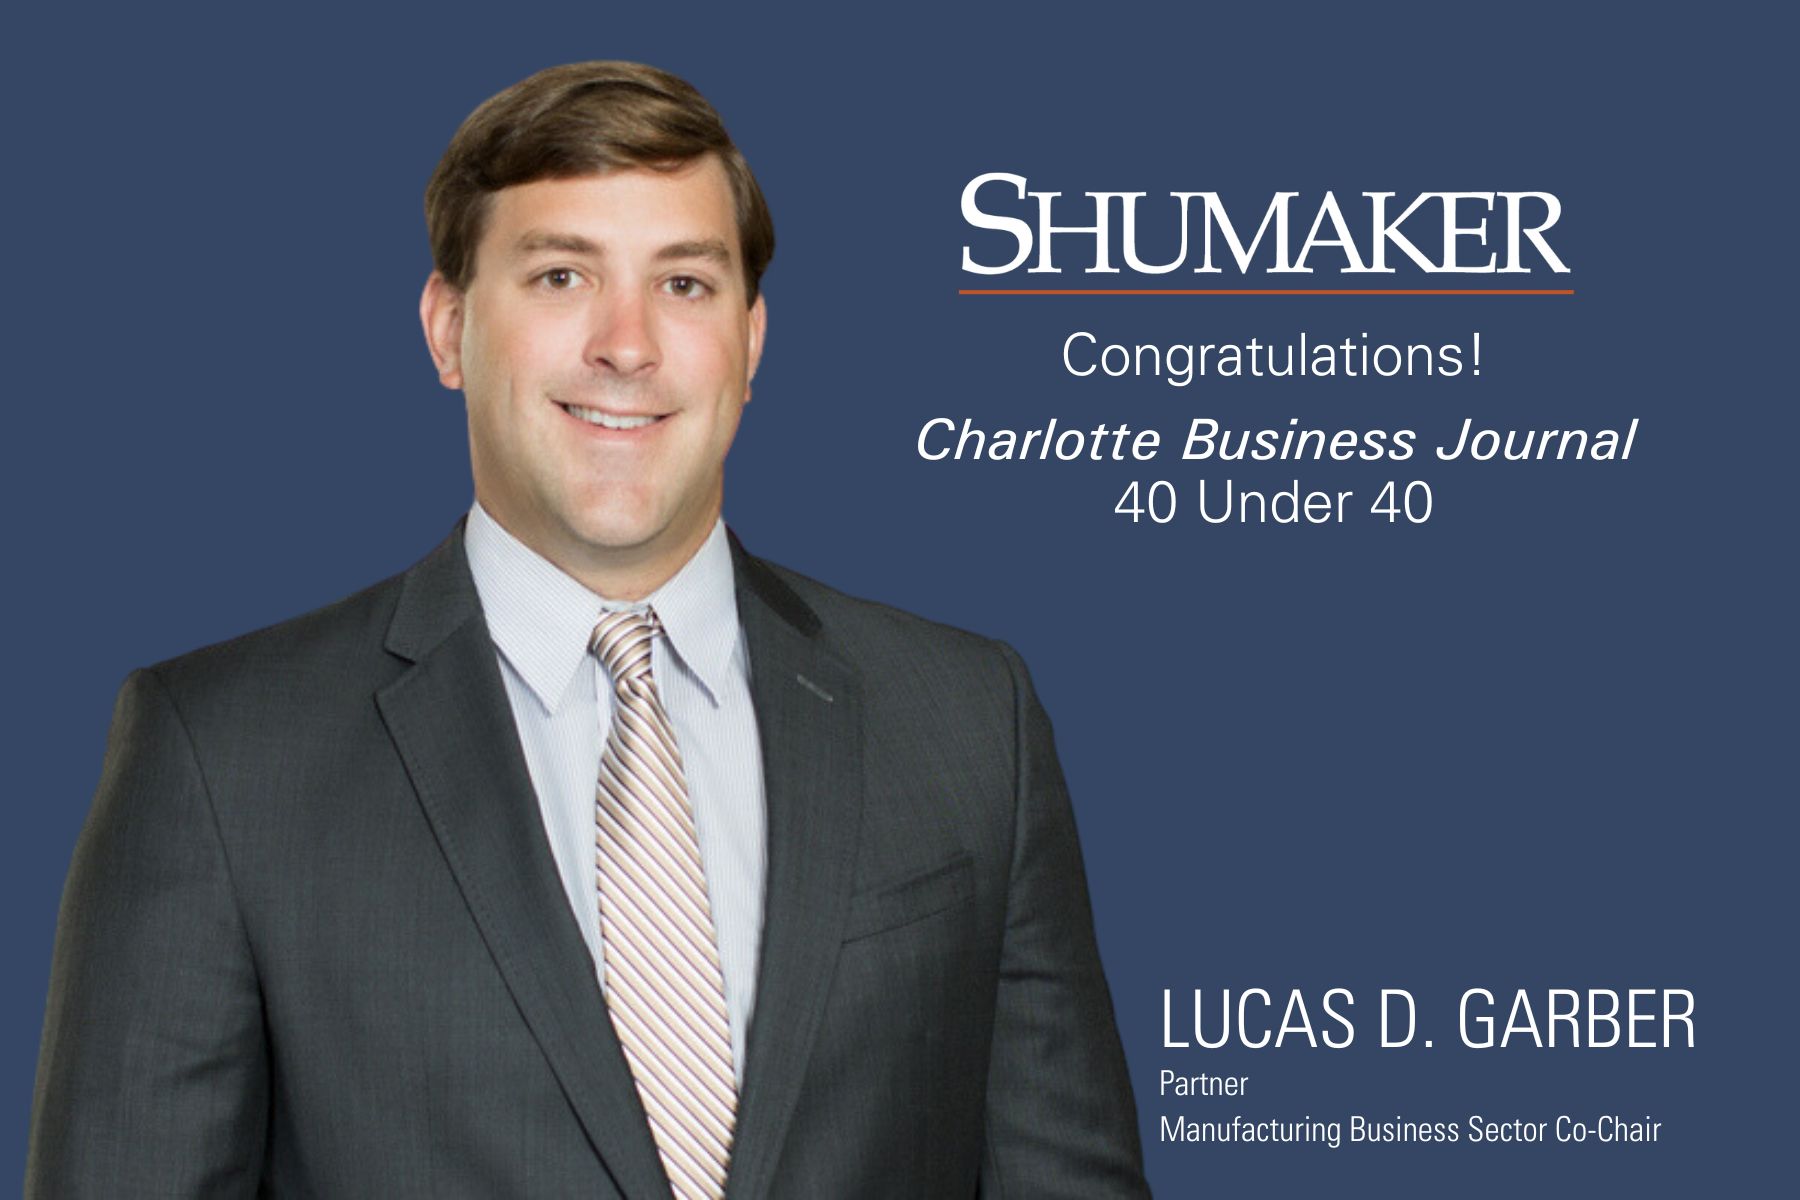 Lucas D. Garber Recognized as a Rising Star by the Charlotte Business Journal